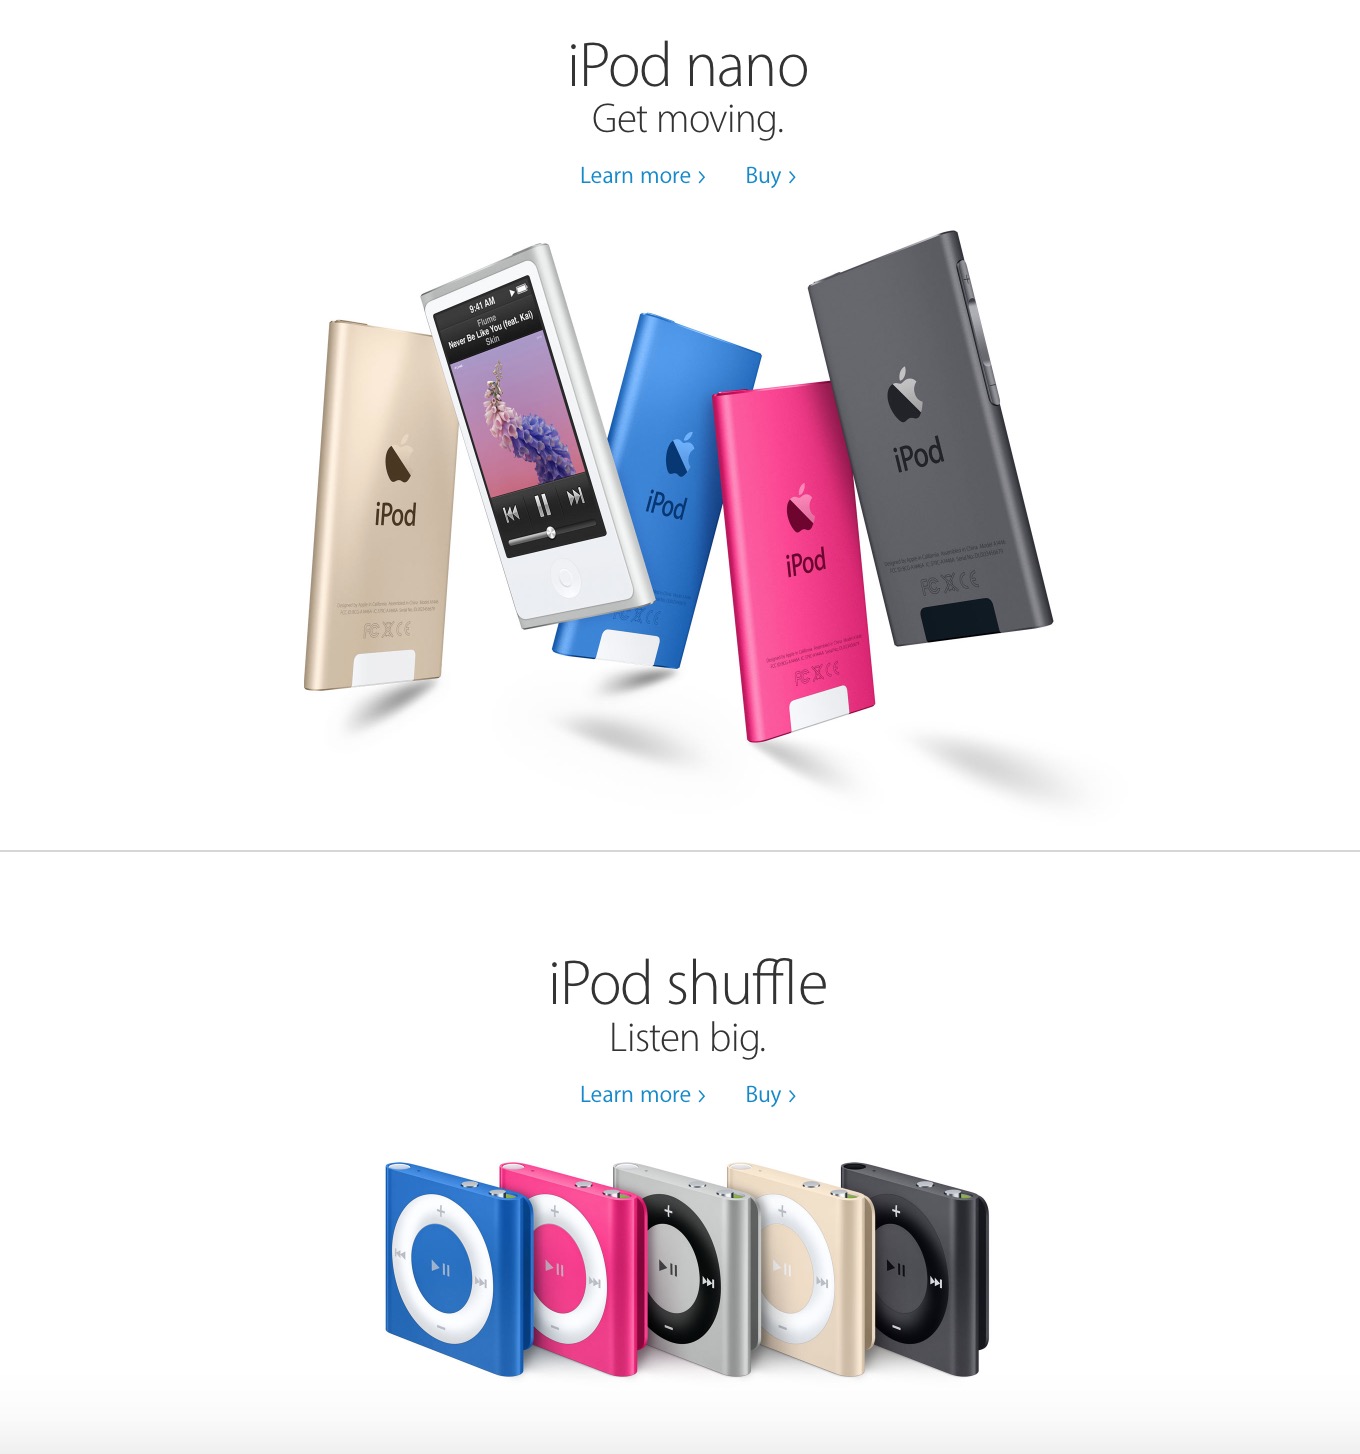 Apple Appears to Have Discontinued the iPod Nano and iPod Shuffle